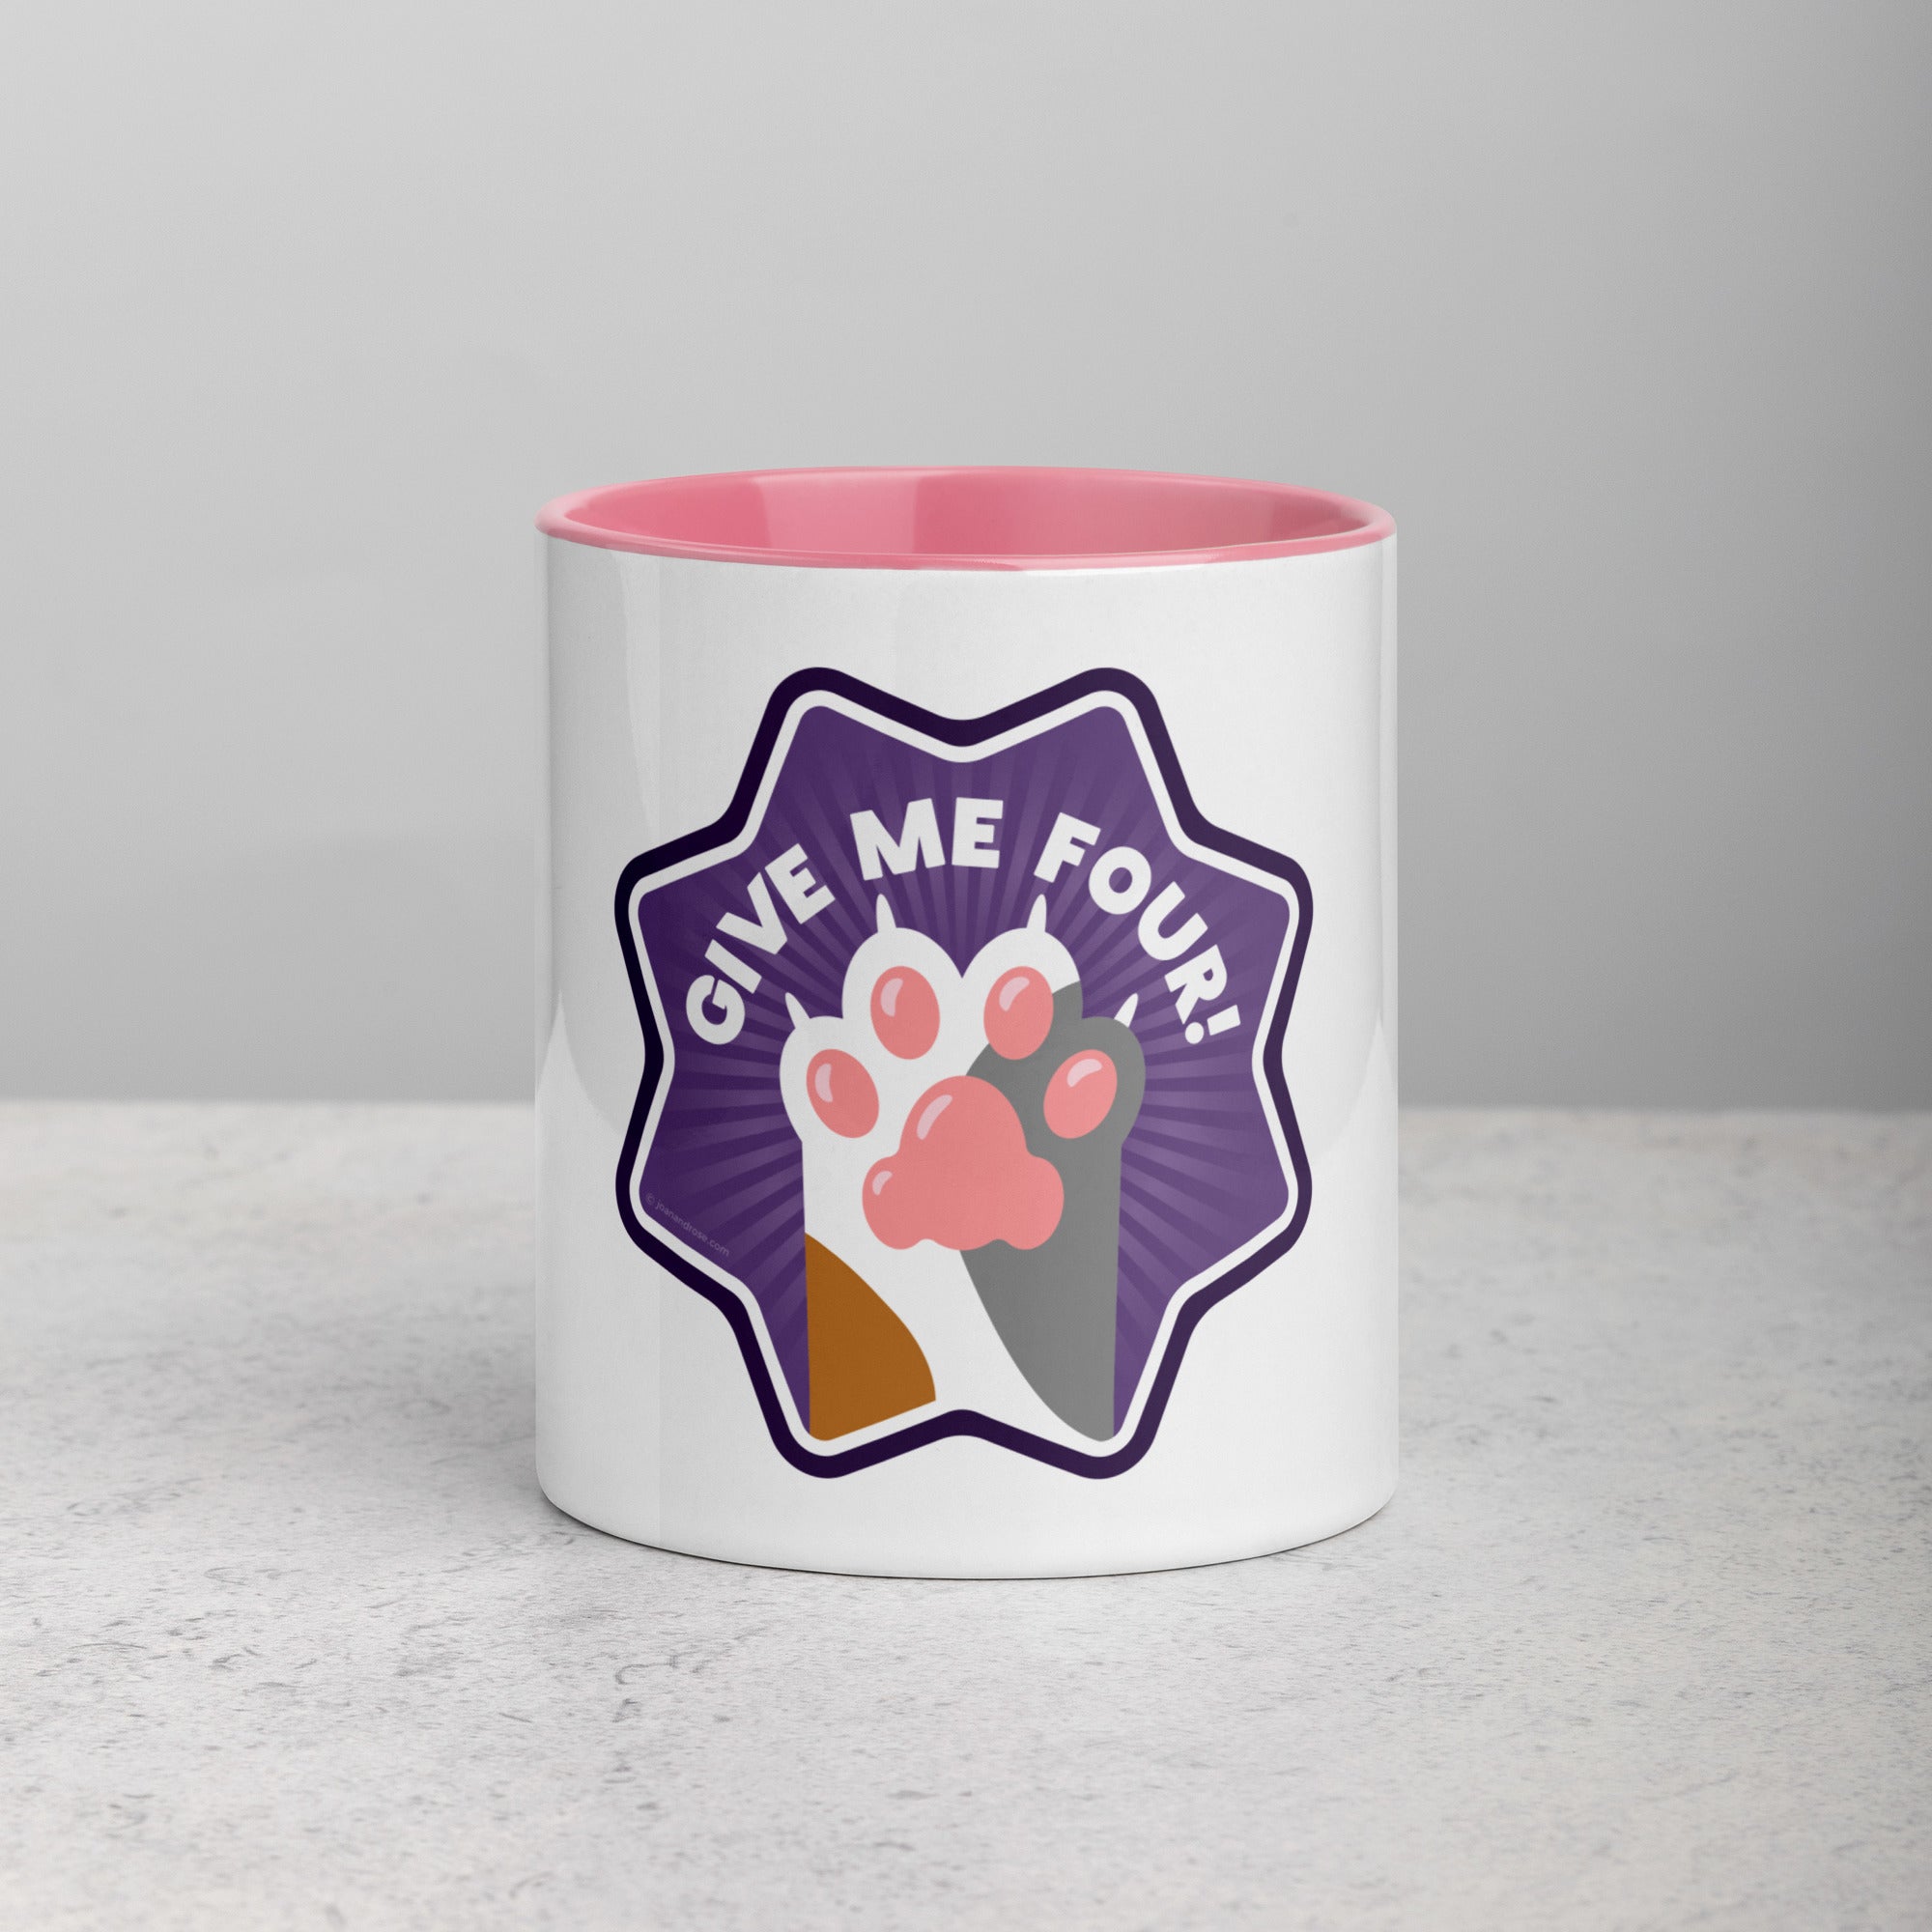 front facing image of a white mug with pink interior and handle. Mug has image of a calico cats paw on a purple 8 sided star with the text 'give me four' 